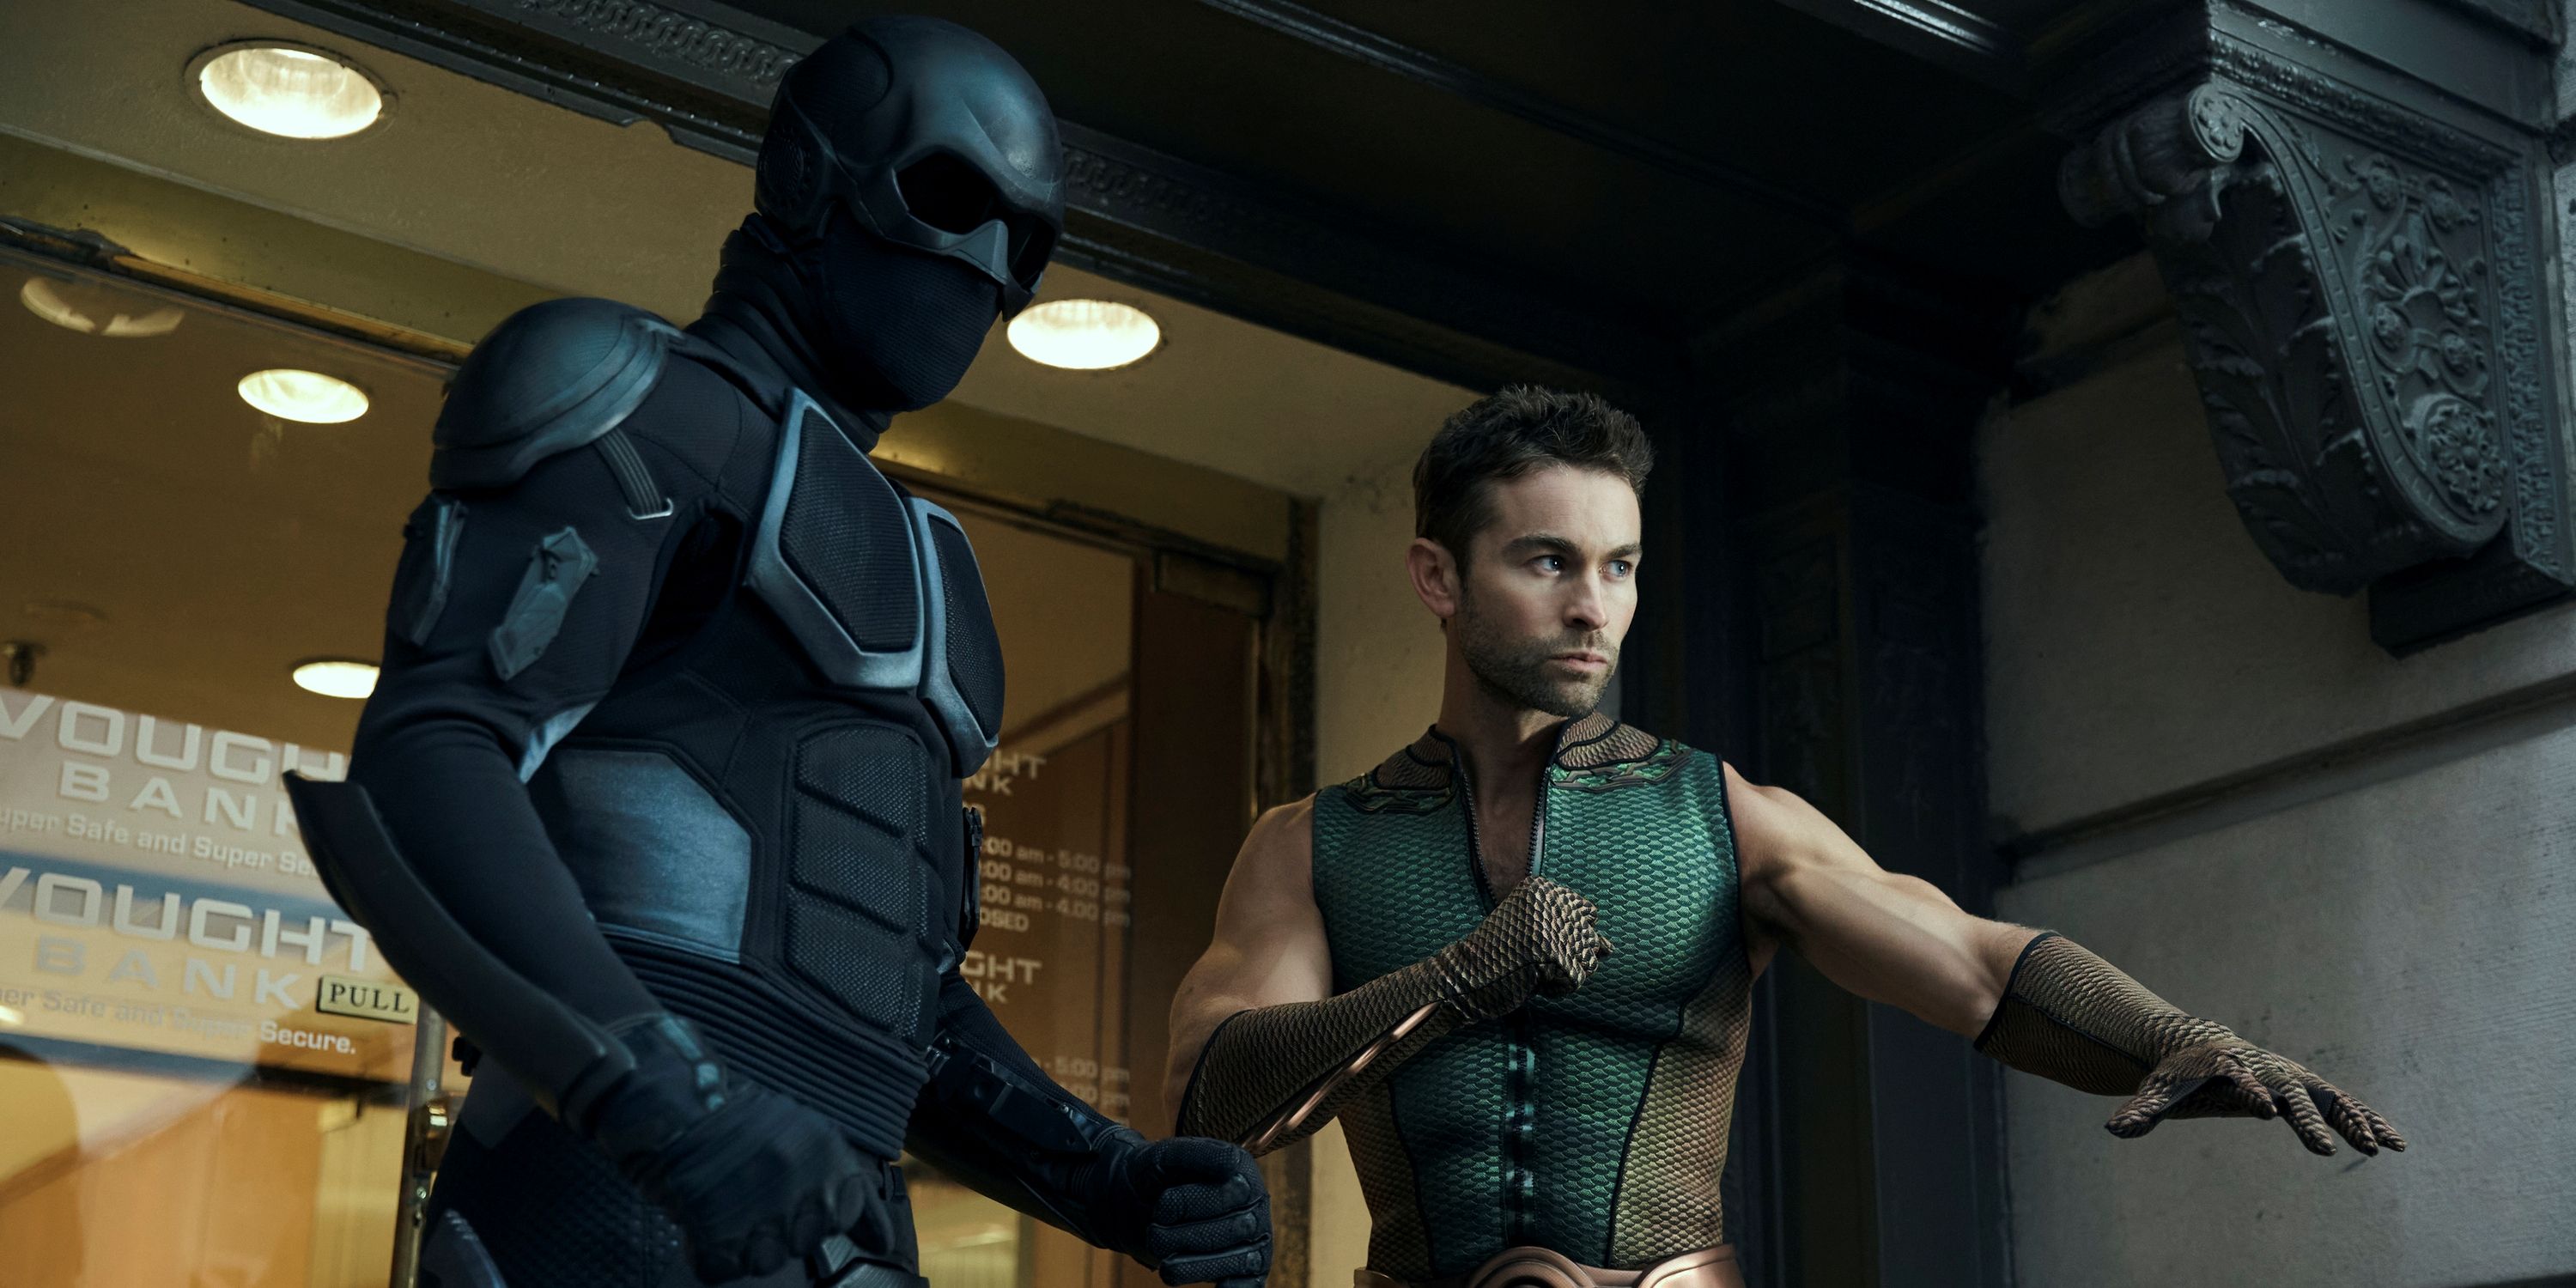 Chace Crawford as The Deep ready to fight alongside Black Noir in The Boys Season 4